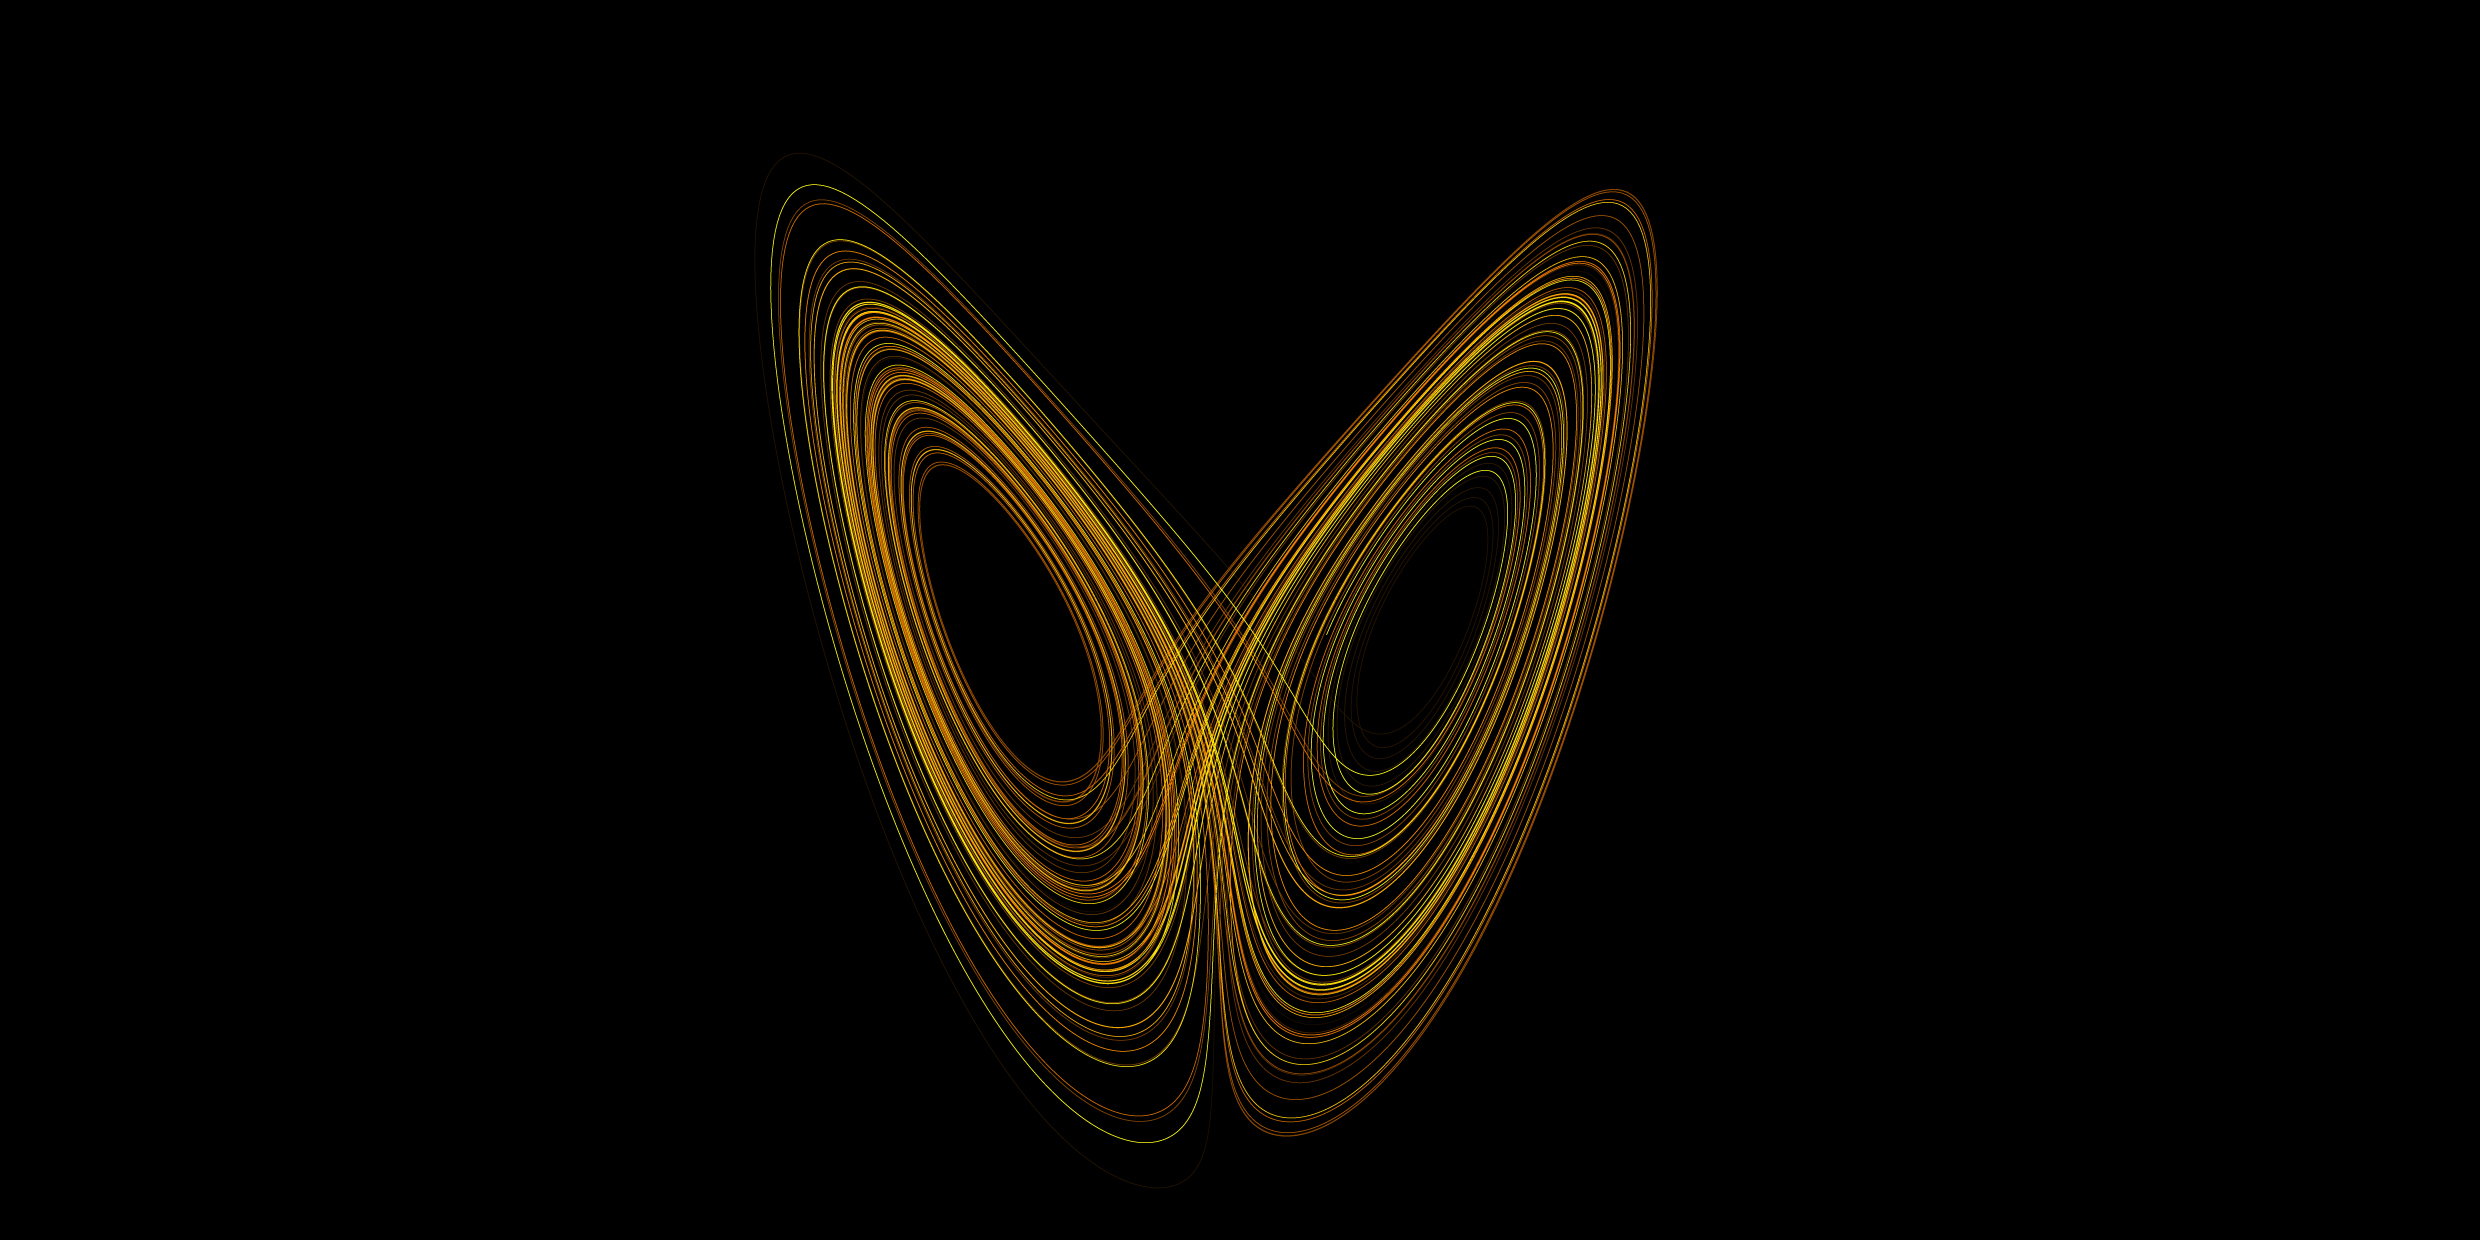 Image of butterfly-shaped mathematical plot